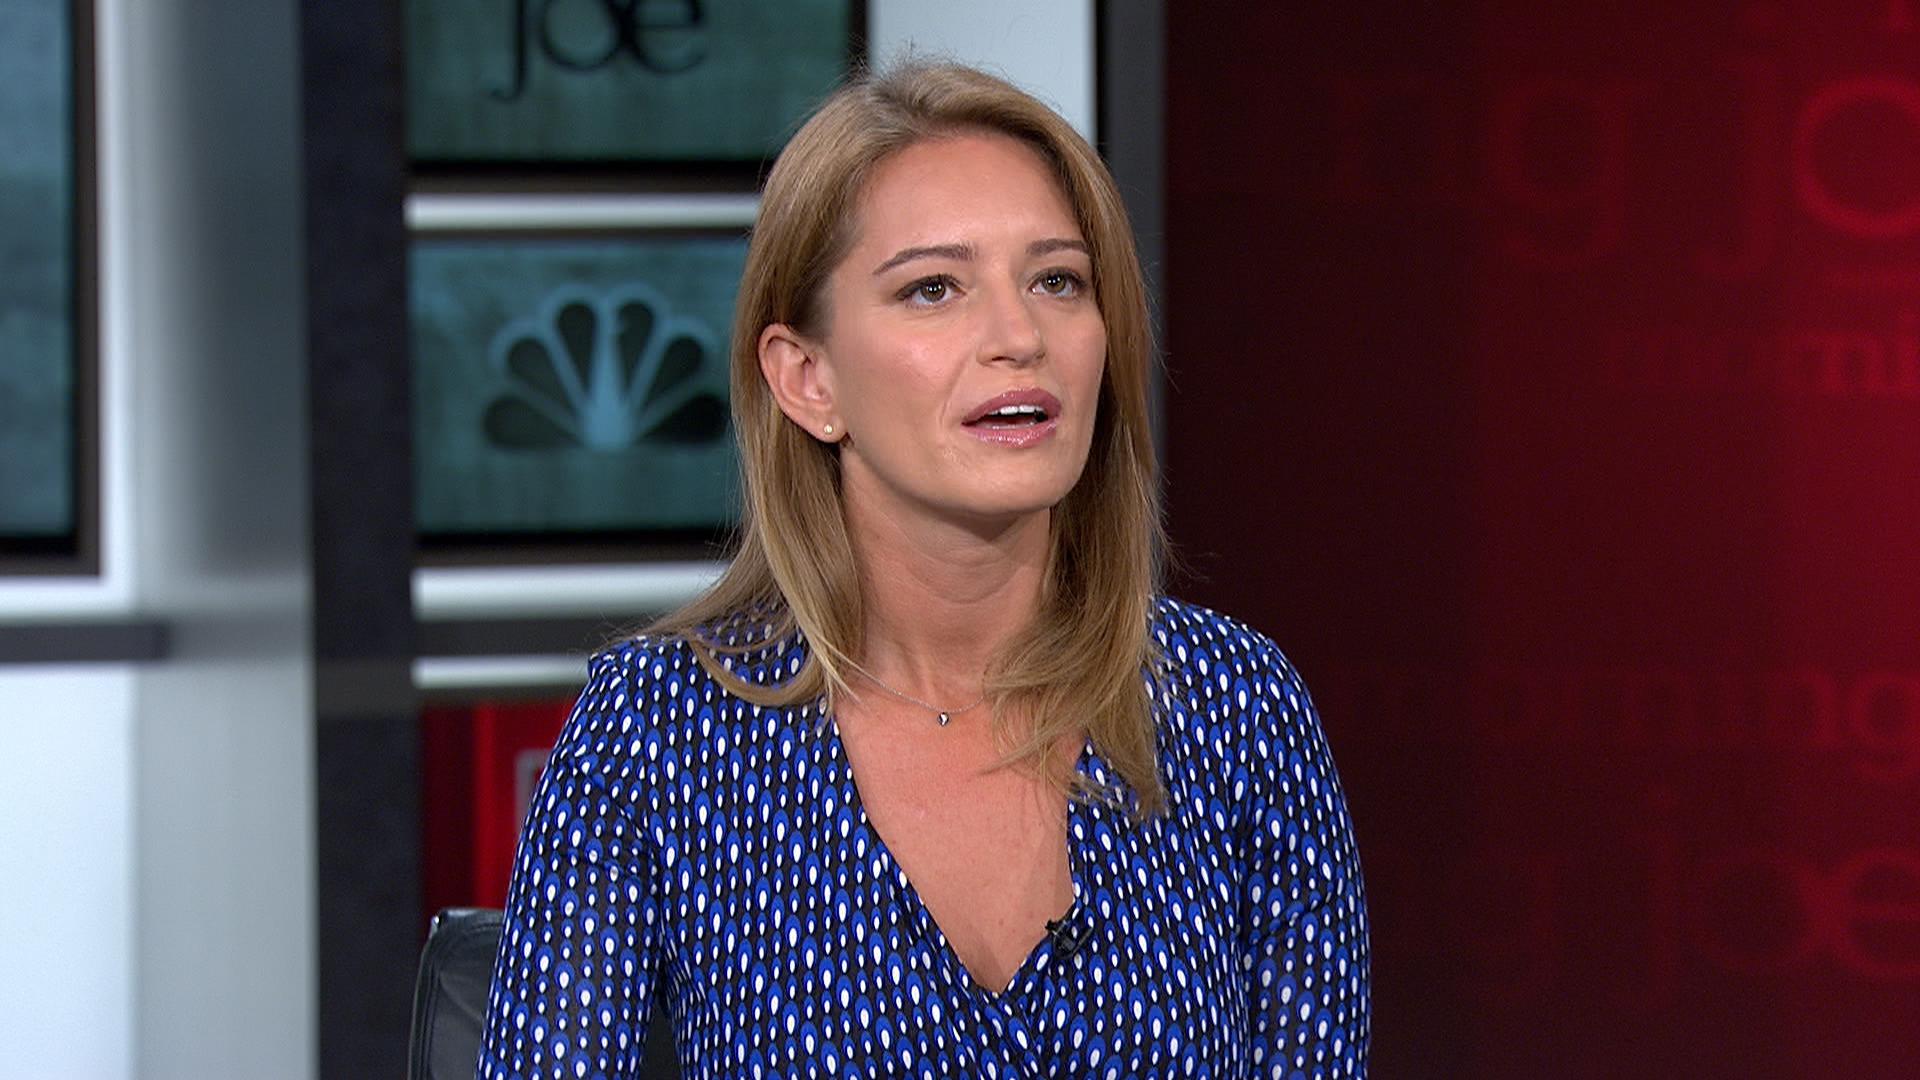 Katy Tur details her time on the Trump trail.